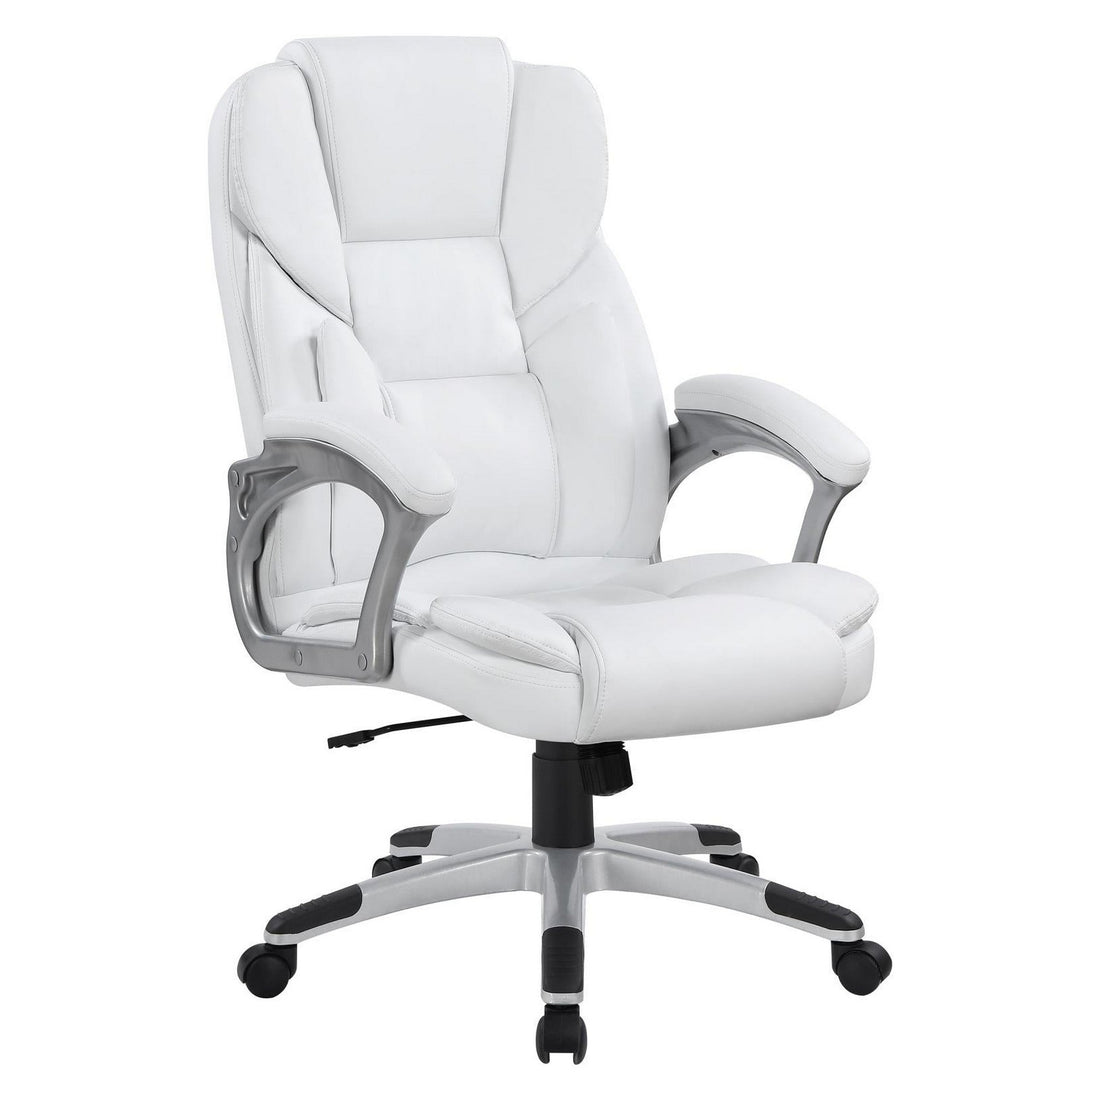 Kaffir Adjustable Height Office Chair White and Silver 801140